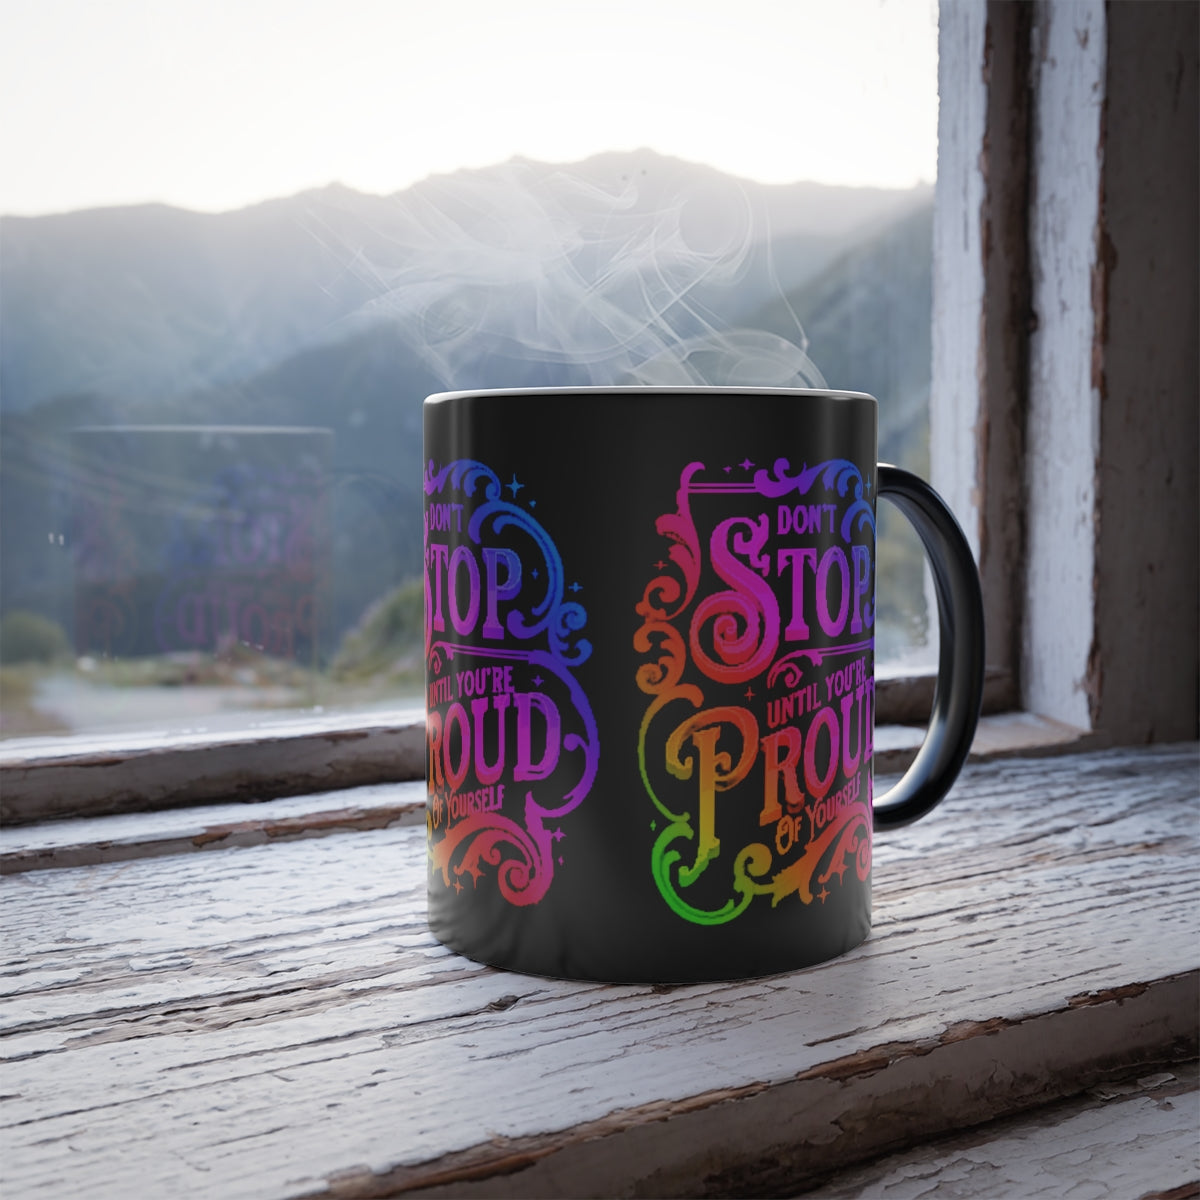 Don't Stop Until You're Proud of Yourself - Color Morphing Mug, 11oz